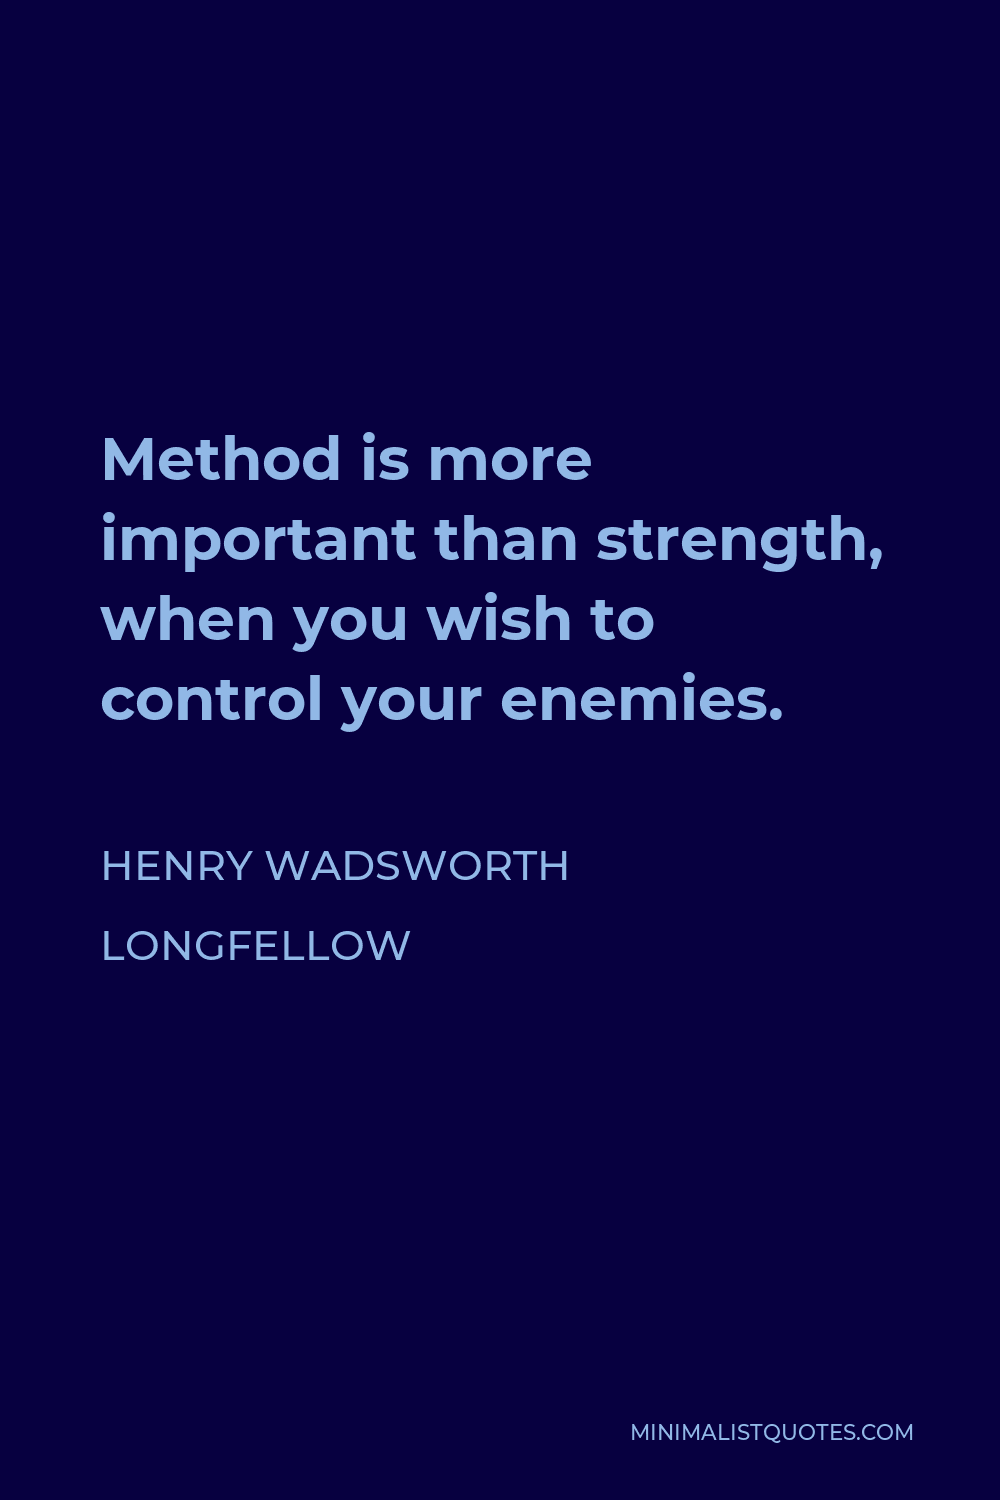 Henry Wadsworth Longfellow Quote - Method is more important than strength, when you wish to control your enemies.